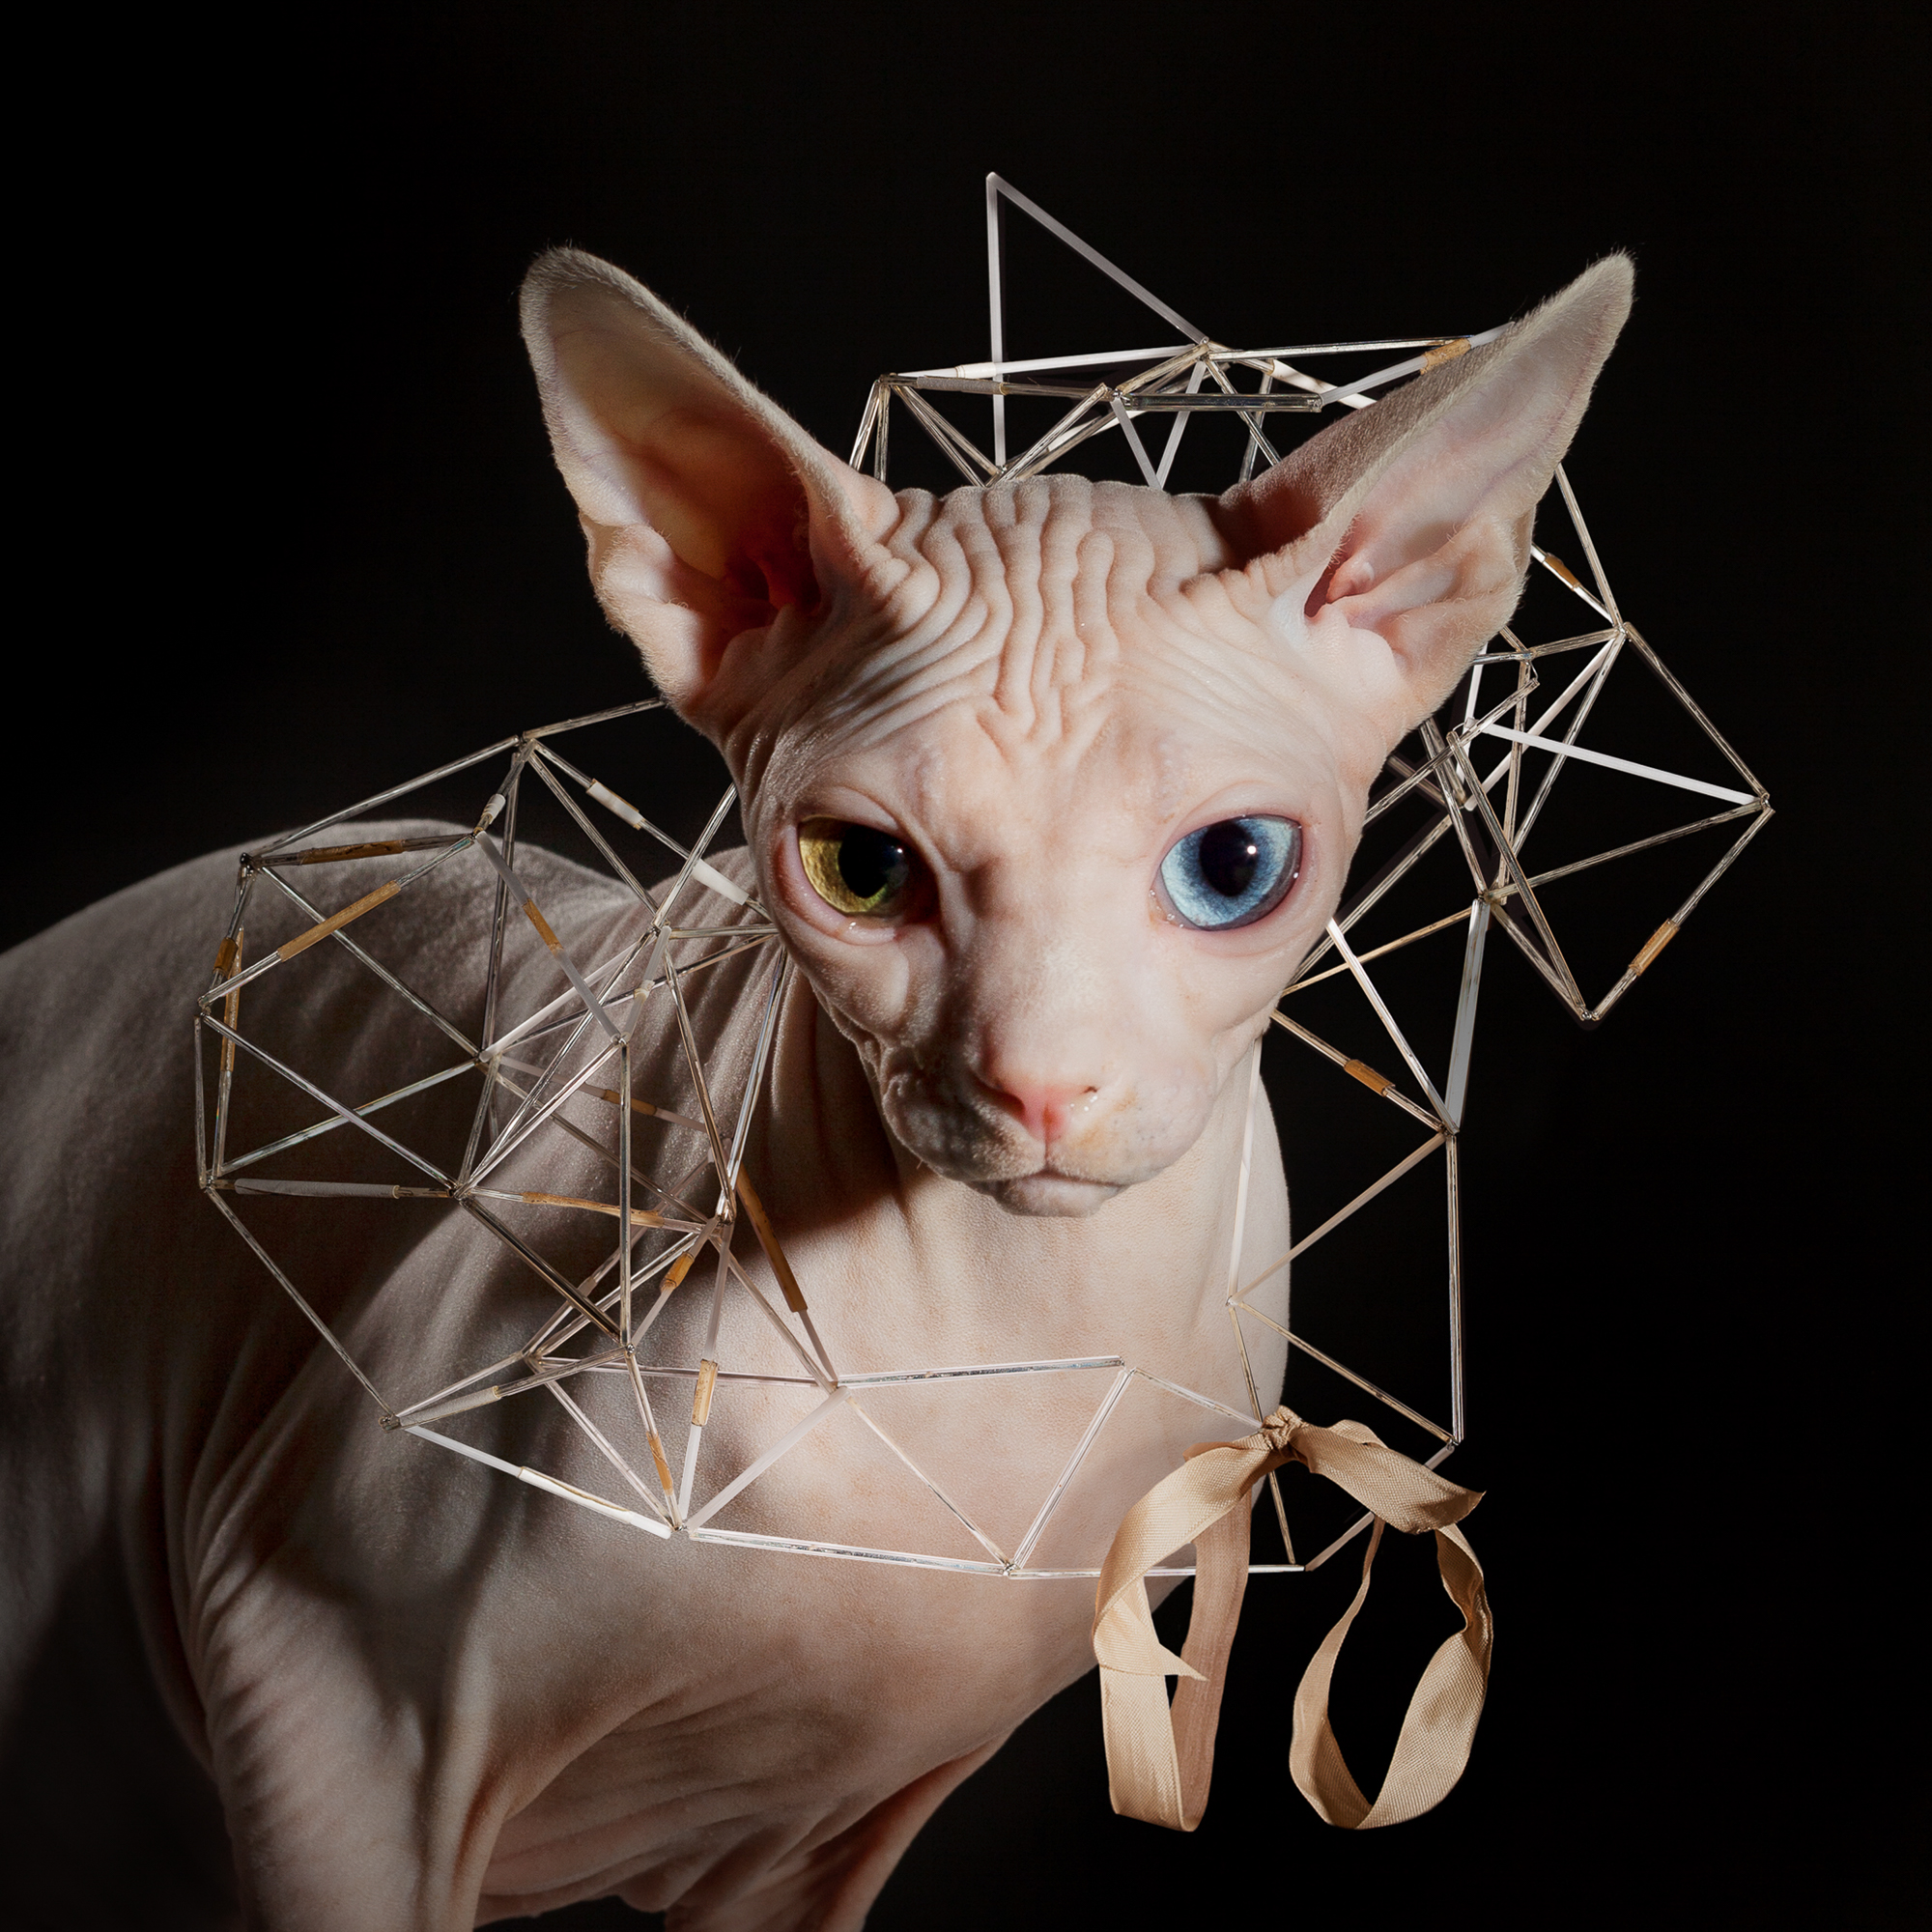  Known for recontextualizing fine vintage jewelry, Julia Barbee has refashioned antique glass lamp work beads for this exquisite, sculptural collar worn by  Xanadu  the hairless Sphynx.  